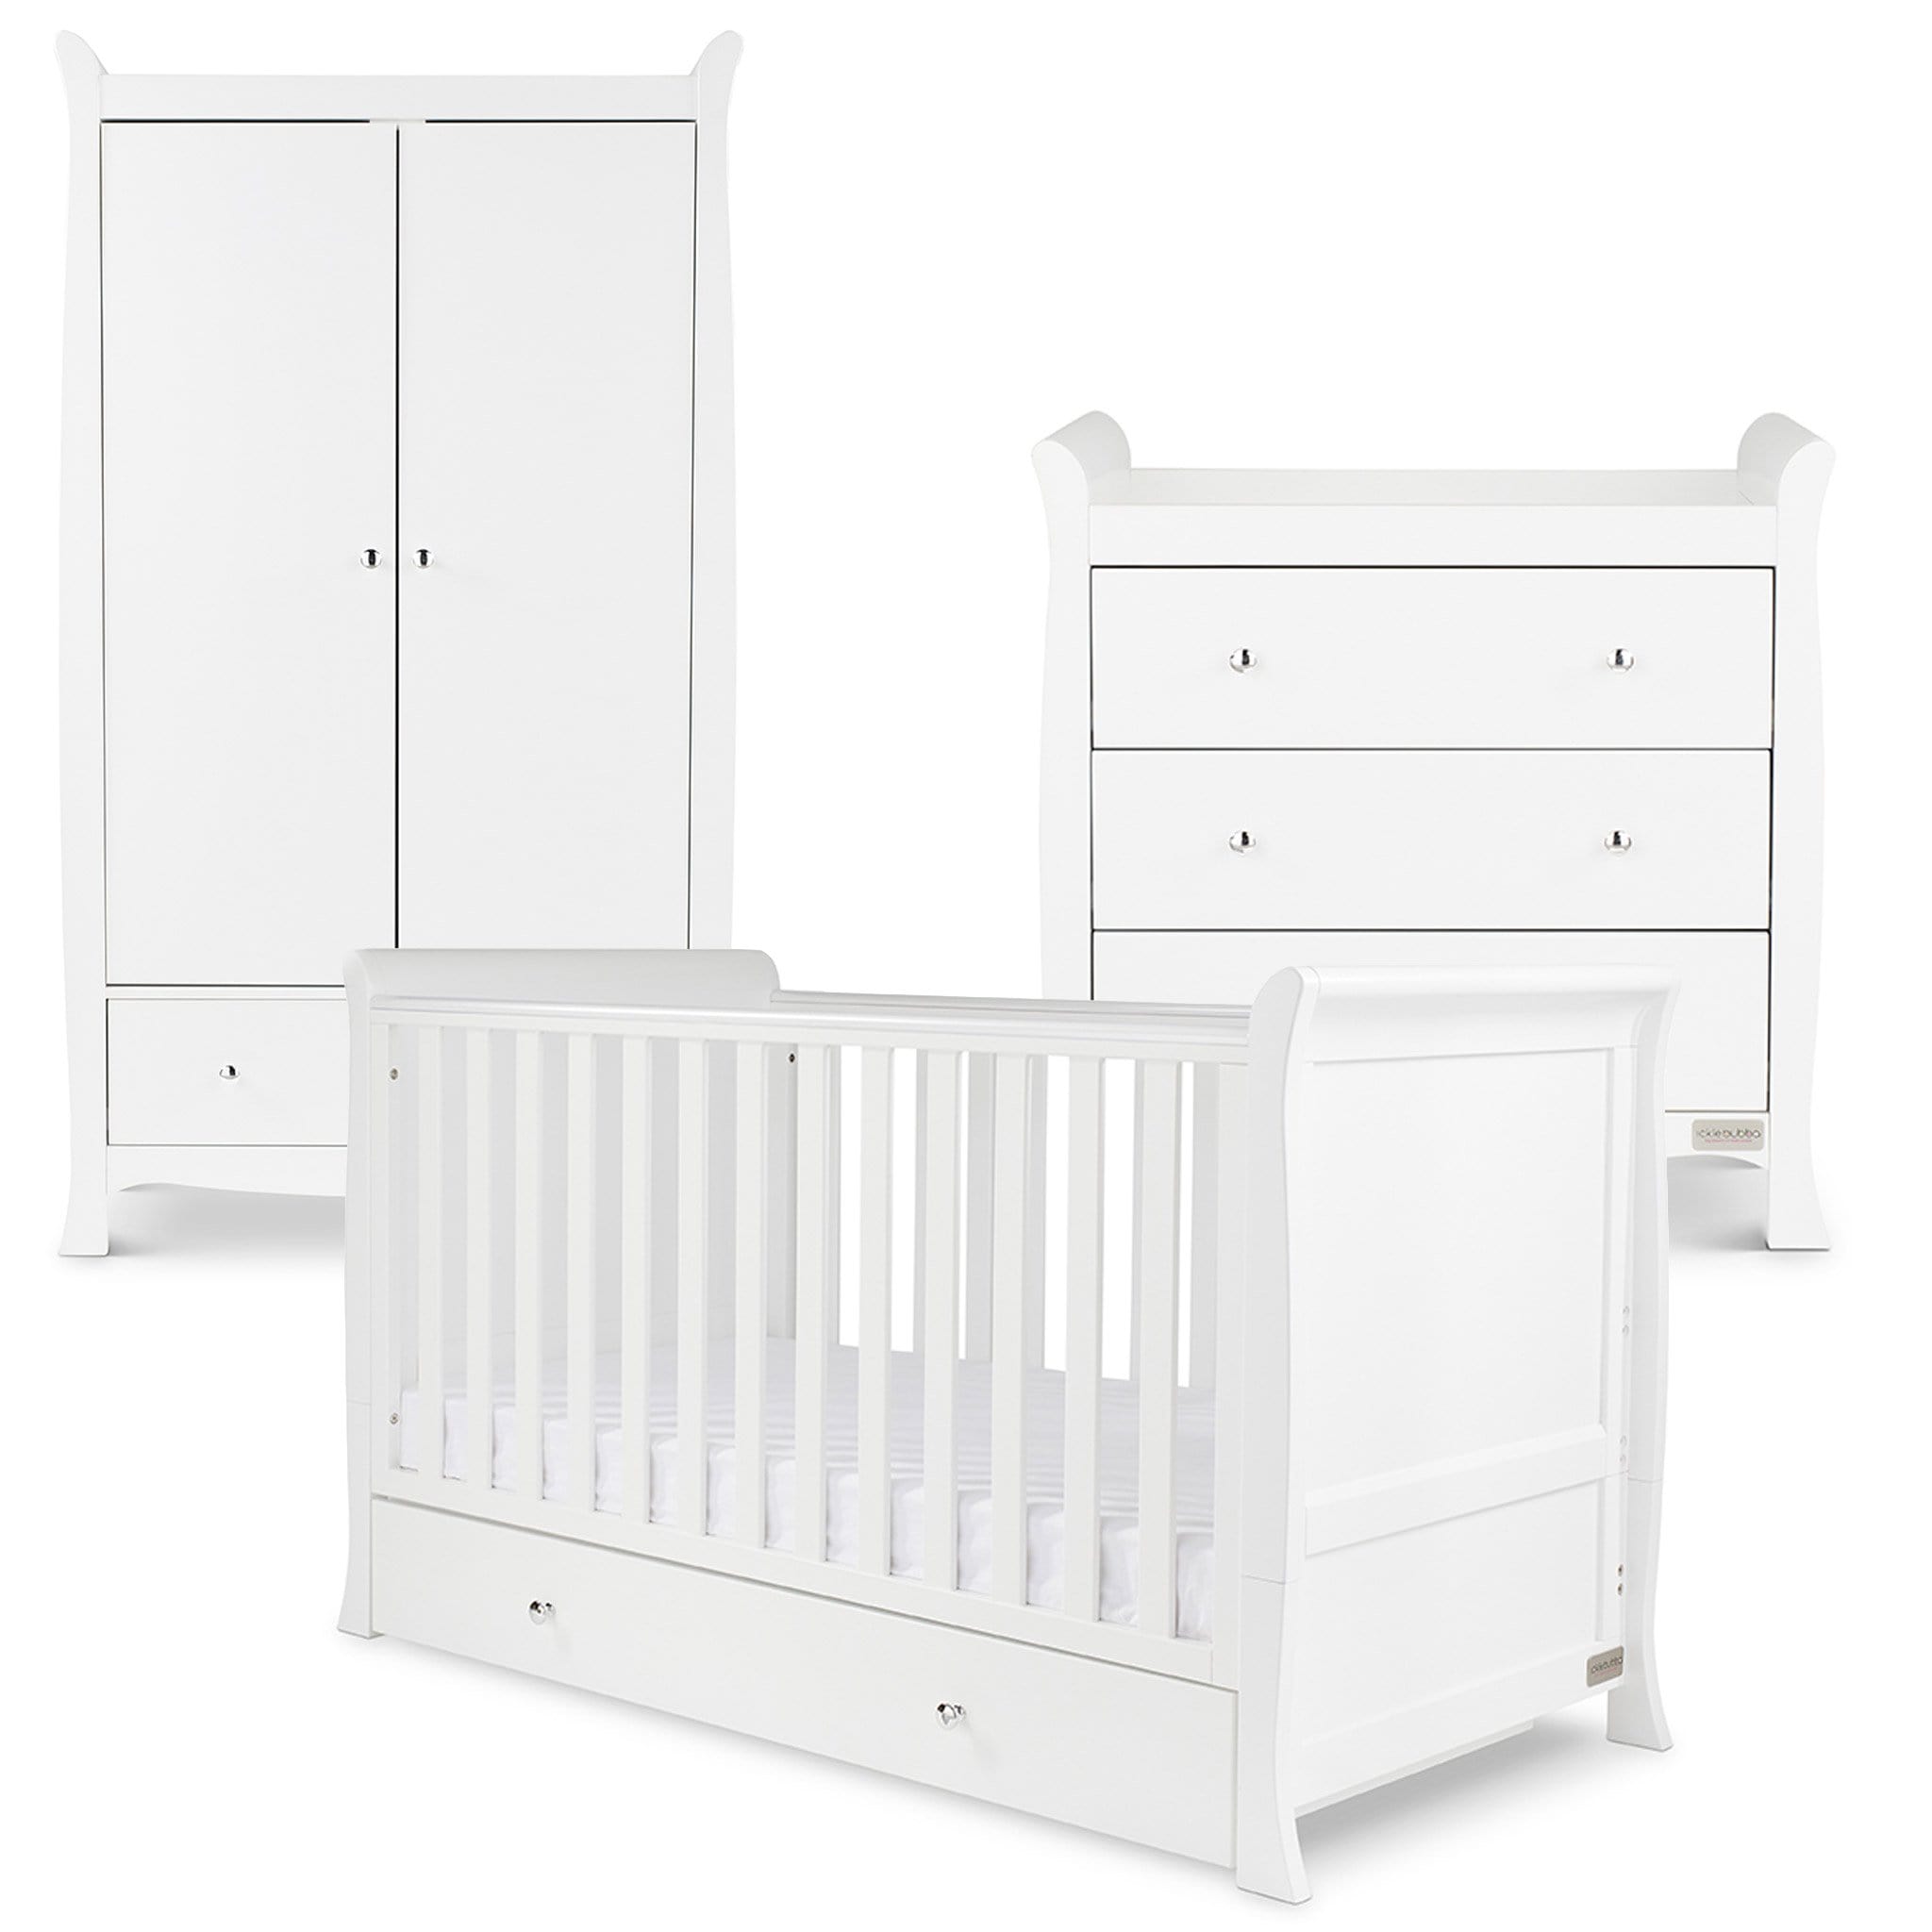 Ickle Bubba Nursery Room Sets Ickle Bubba Snowdon Classic 3 Piece Furniture Set - White